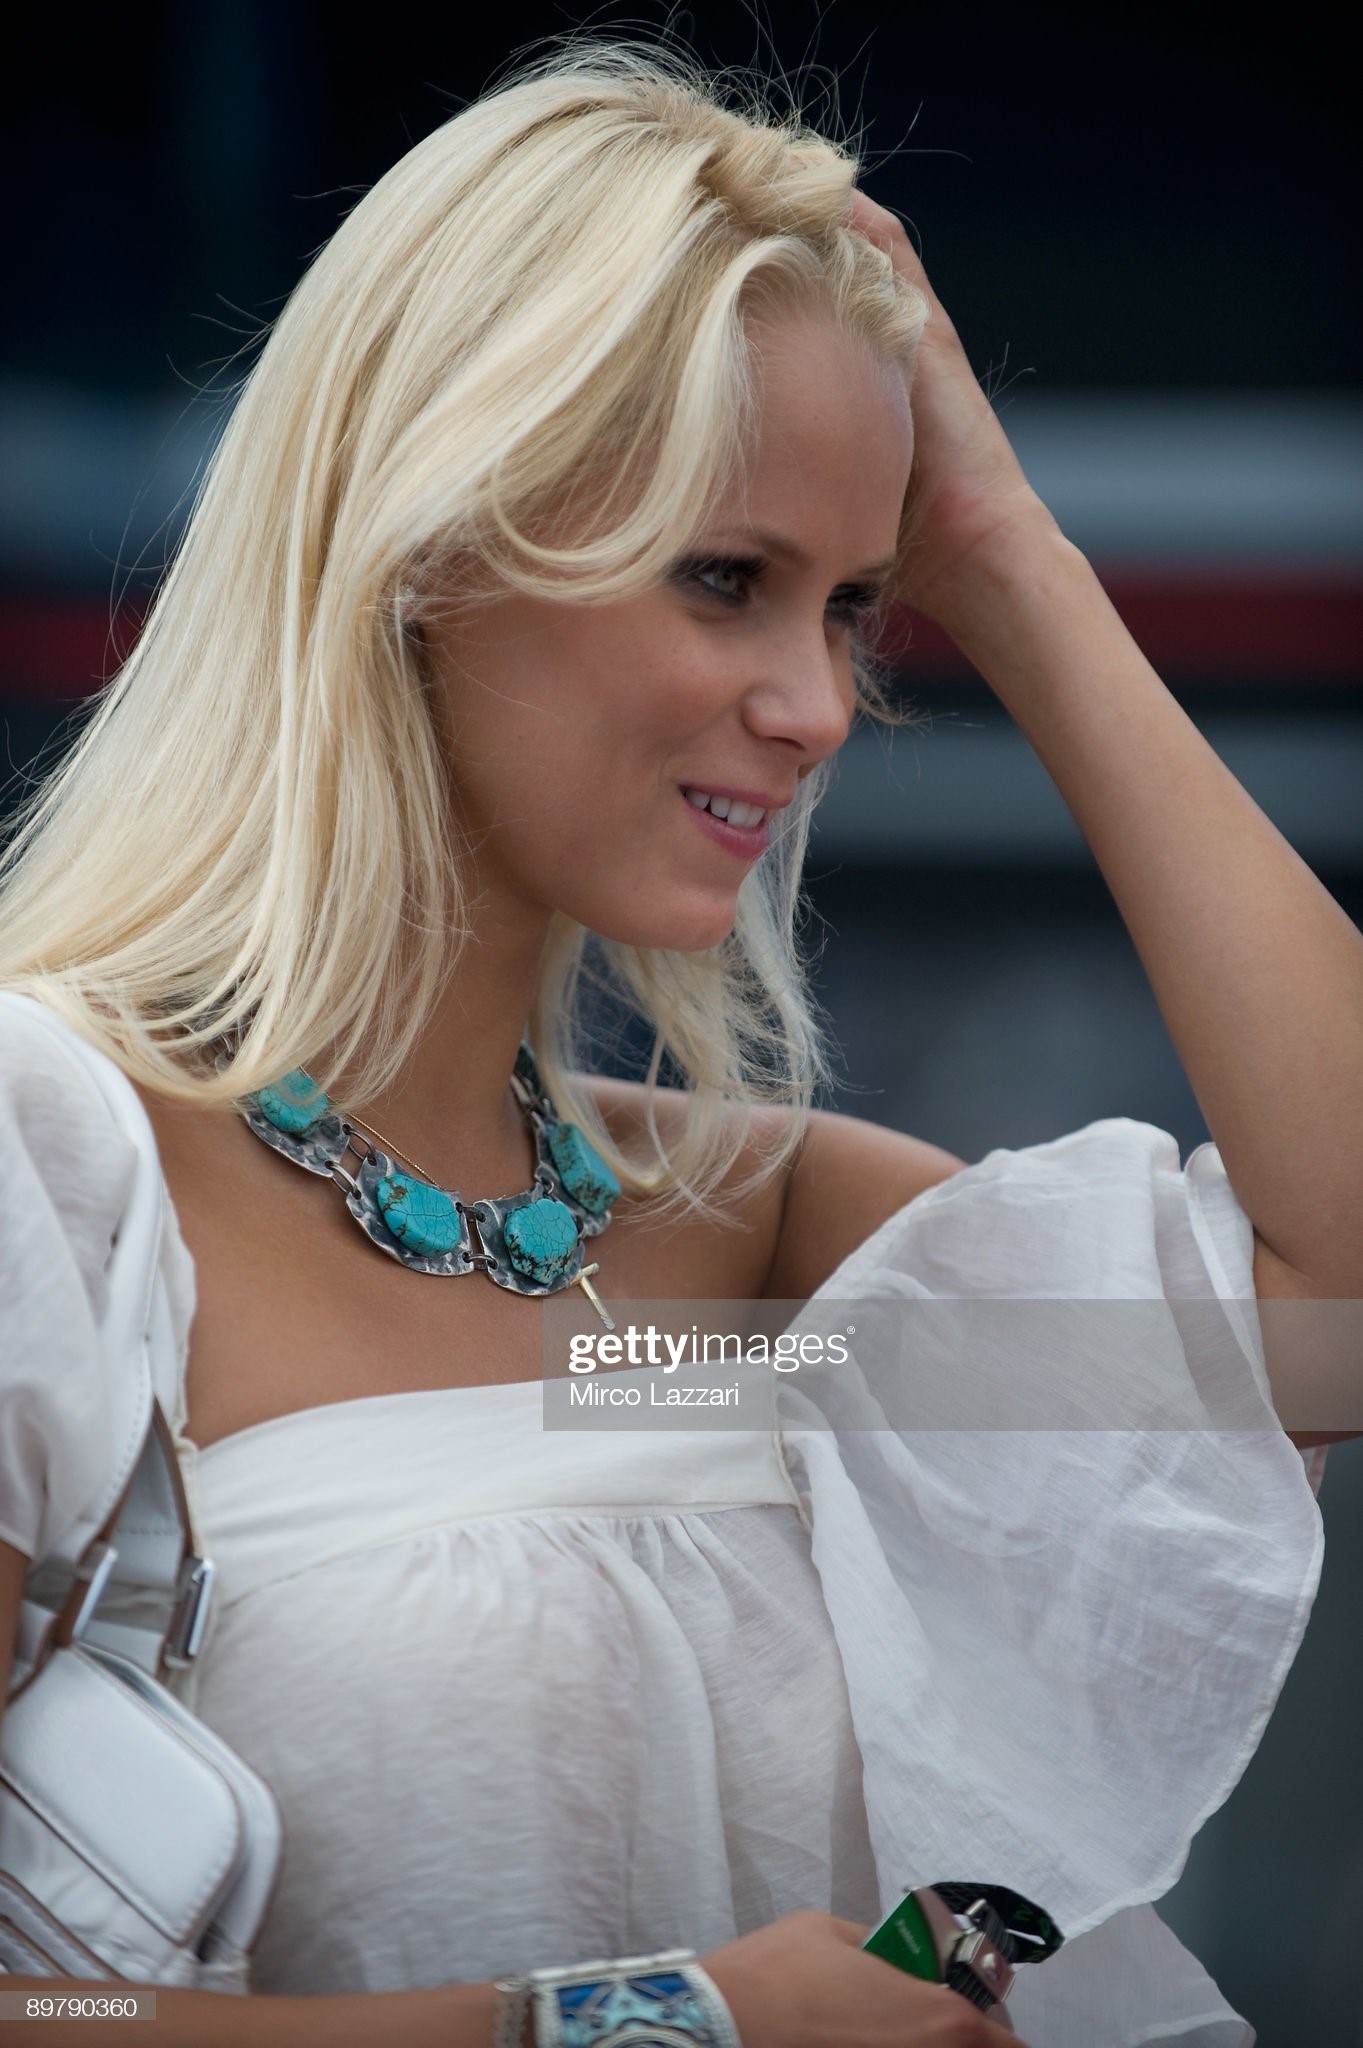 A grid girl poses for fans during the pit walk of the MotoGP World Championship Grand Prix of Czech Republic on August 14, 2009 in Brno, Czech Republic. 